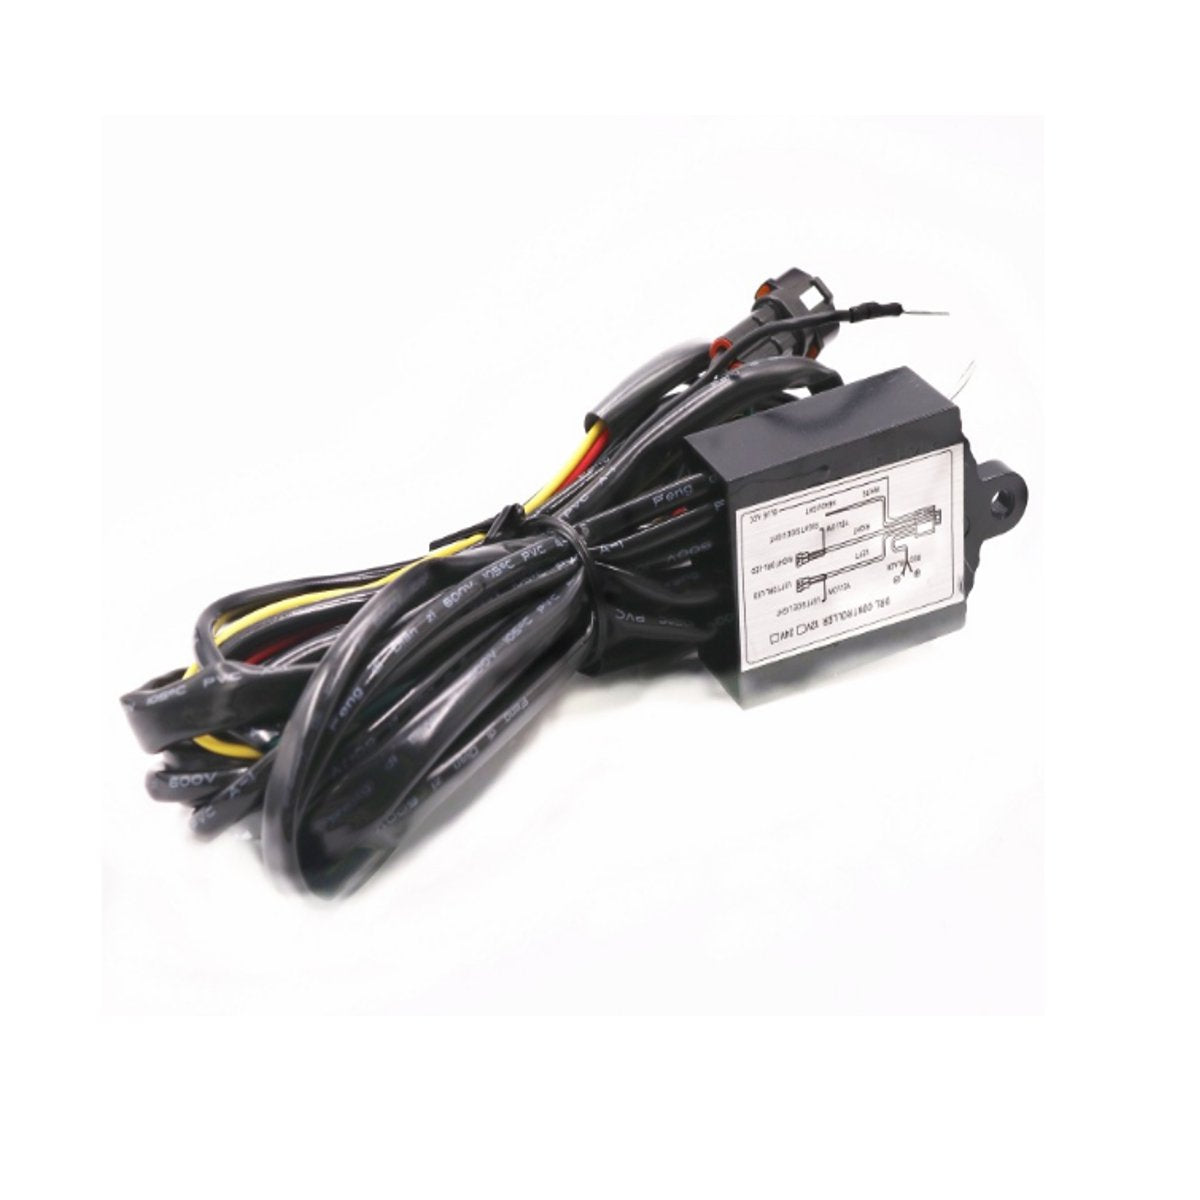 Dark Slate Gray 12V DRL Dimmer LED Dimming Relay Daytime Running Light Car On/Off Switch Harness With Flash Turn Signal Delay Function